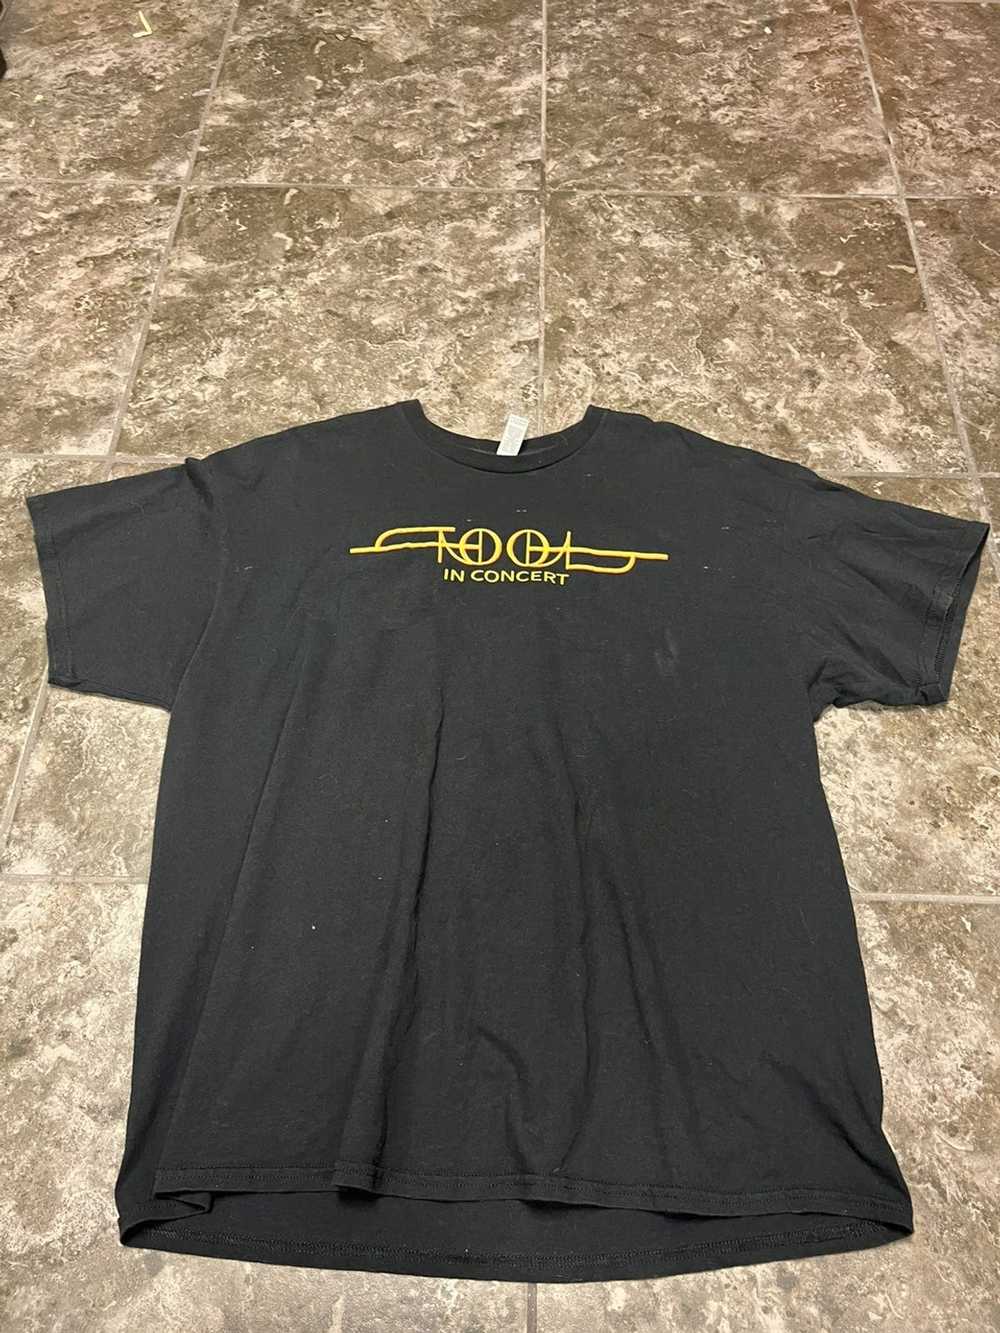 Band Tees Tool In Concert 2022 Tour Tshirt - image 2